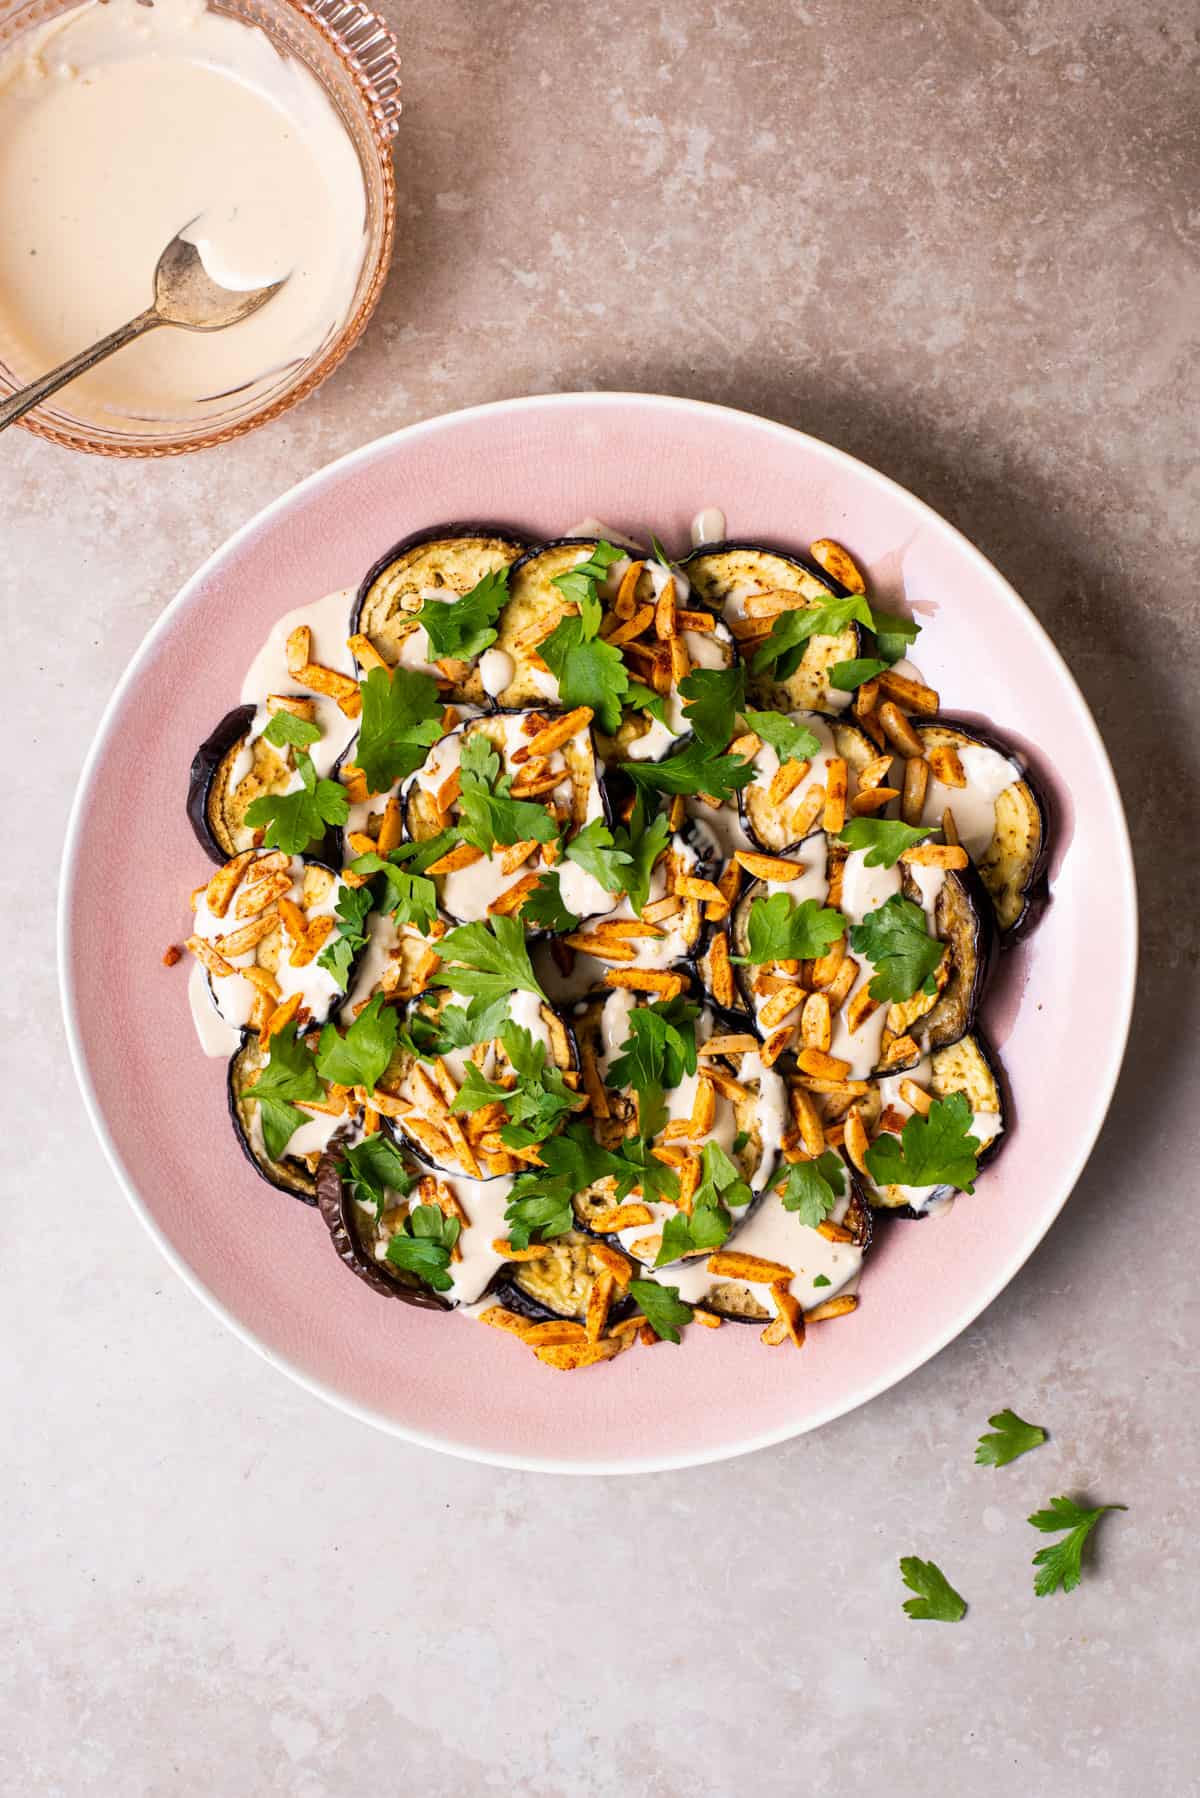 Ottolenghi-Inspired Roasted Eggplant with Tahini and Almonds